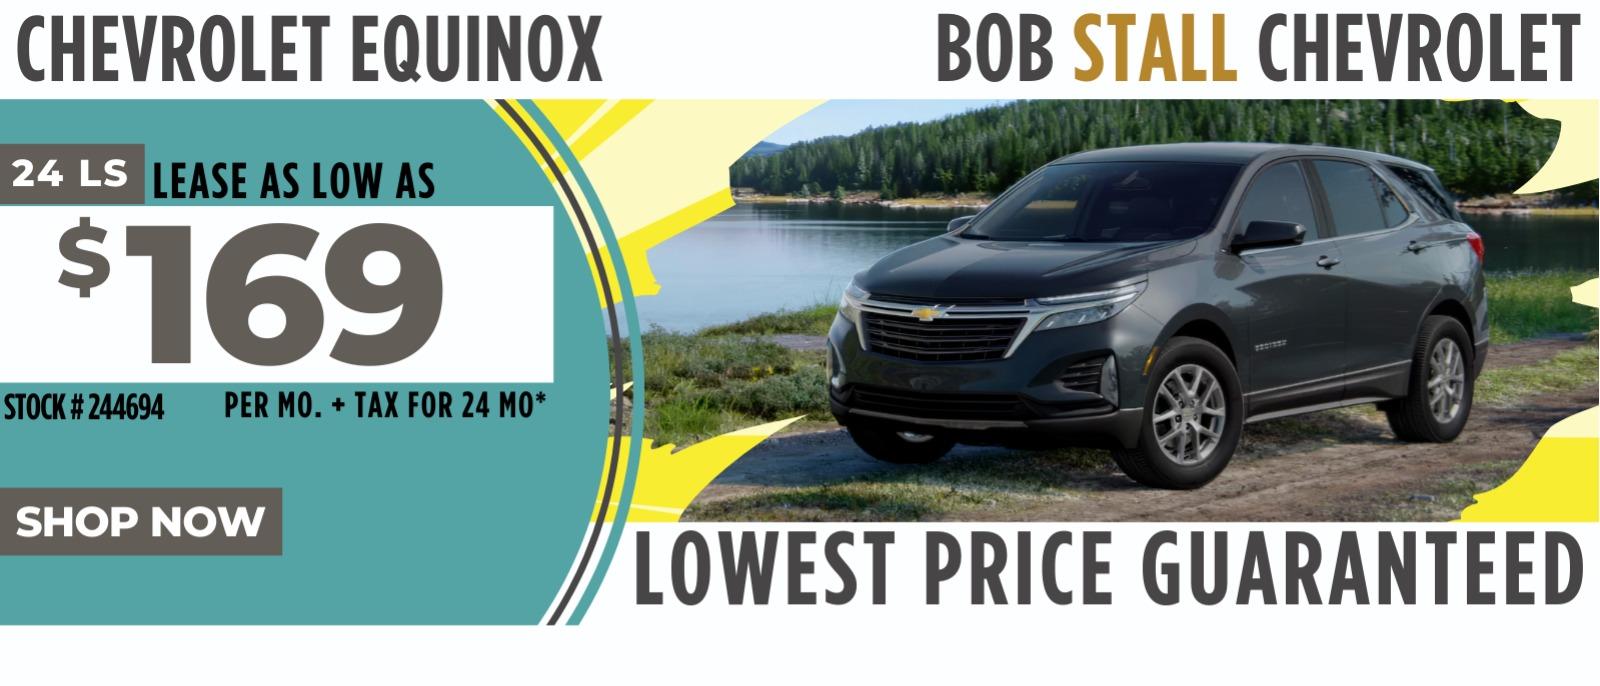 2024 Equinox Savings - Lease as low as $169 per month for 24 Months